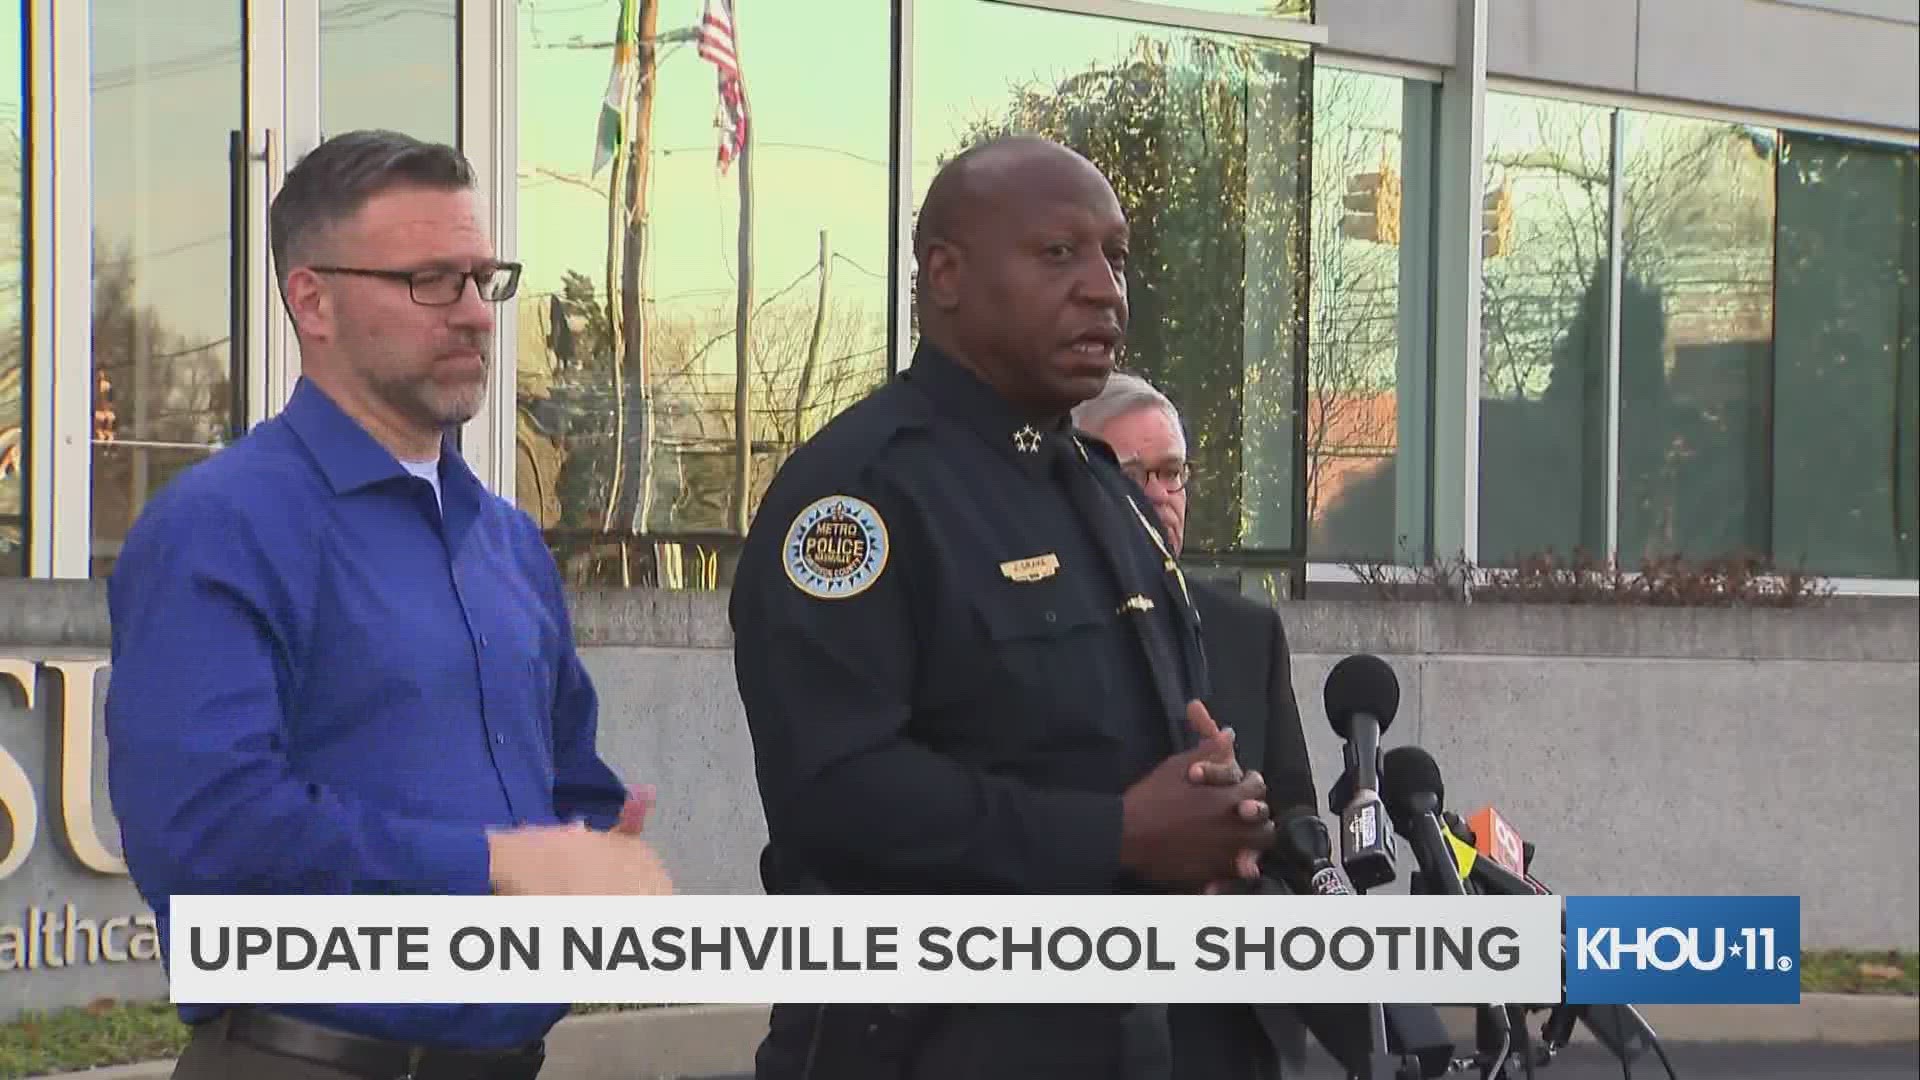 The three children and three adults who were killed in the Nashville school shooting have been identified. The youngest victims were just 9 years old.